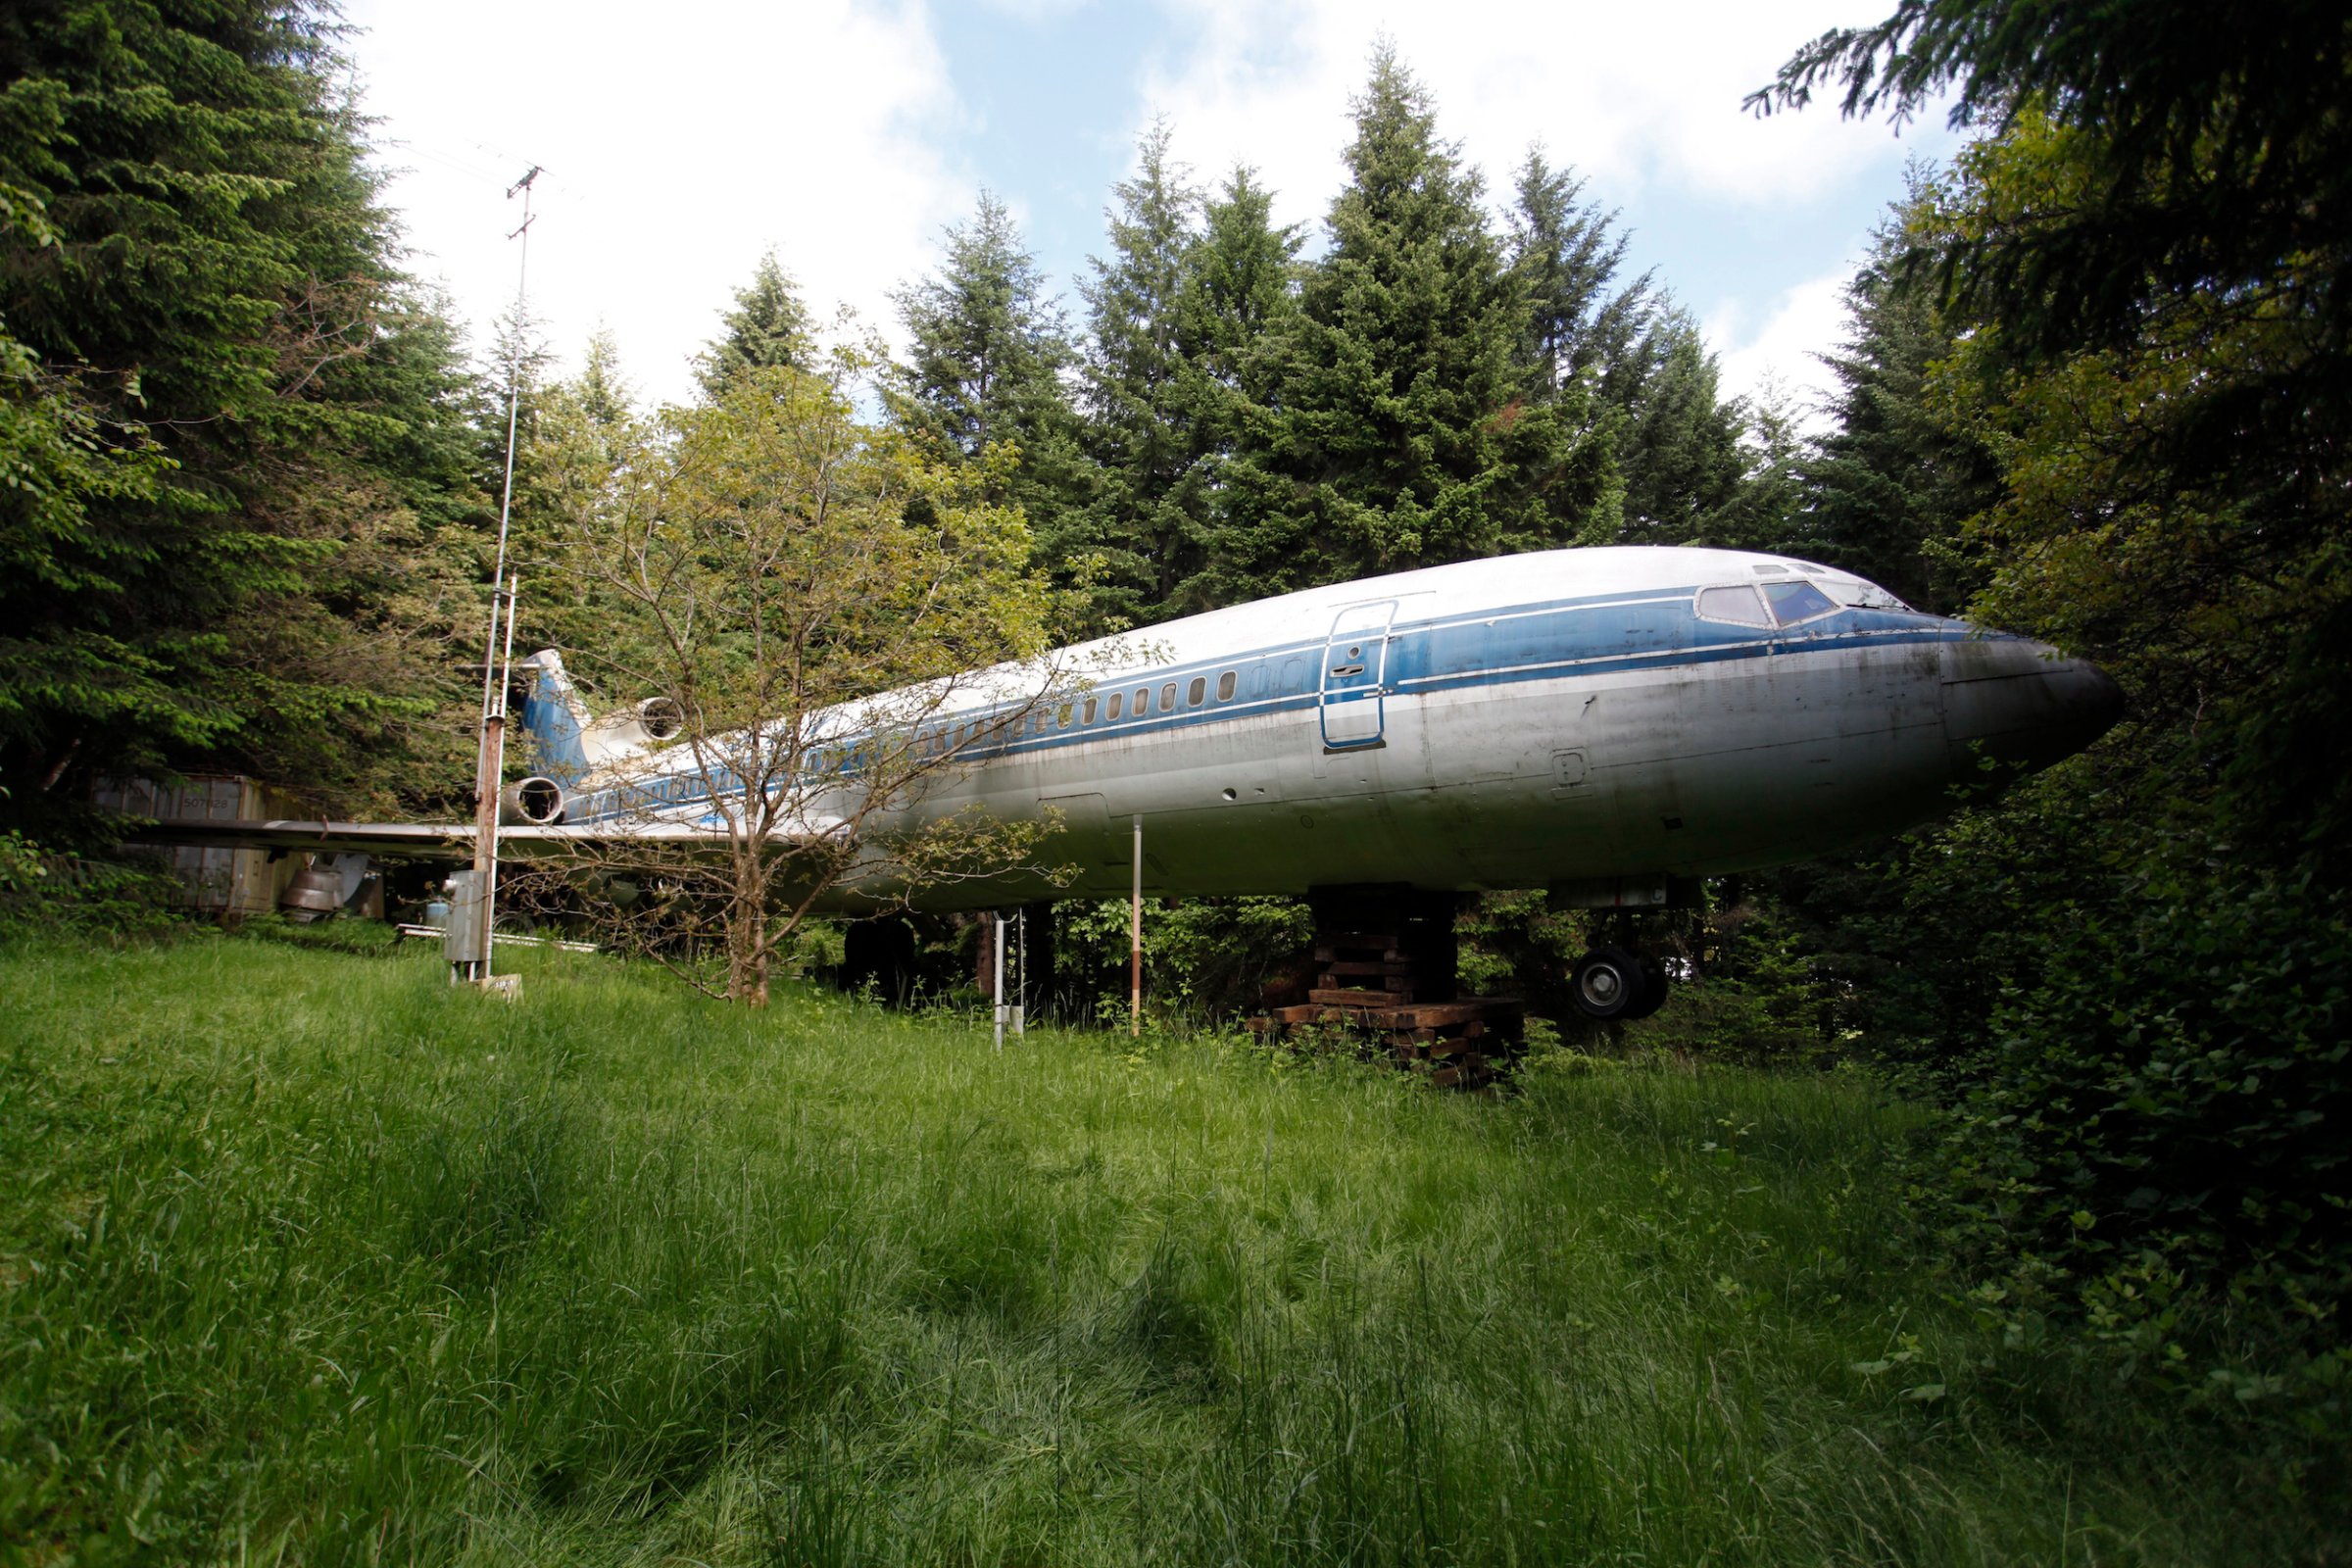 Boeing 727 home of Bruce Campbell is seen in the woods outside the suburbs of Portland, Oregon